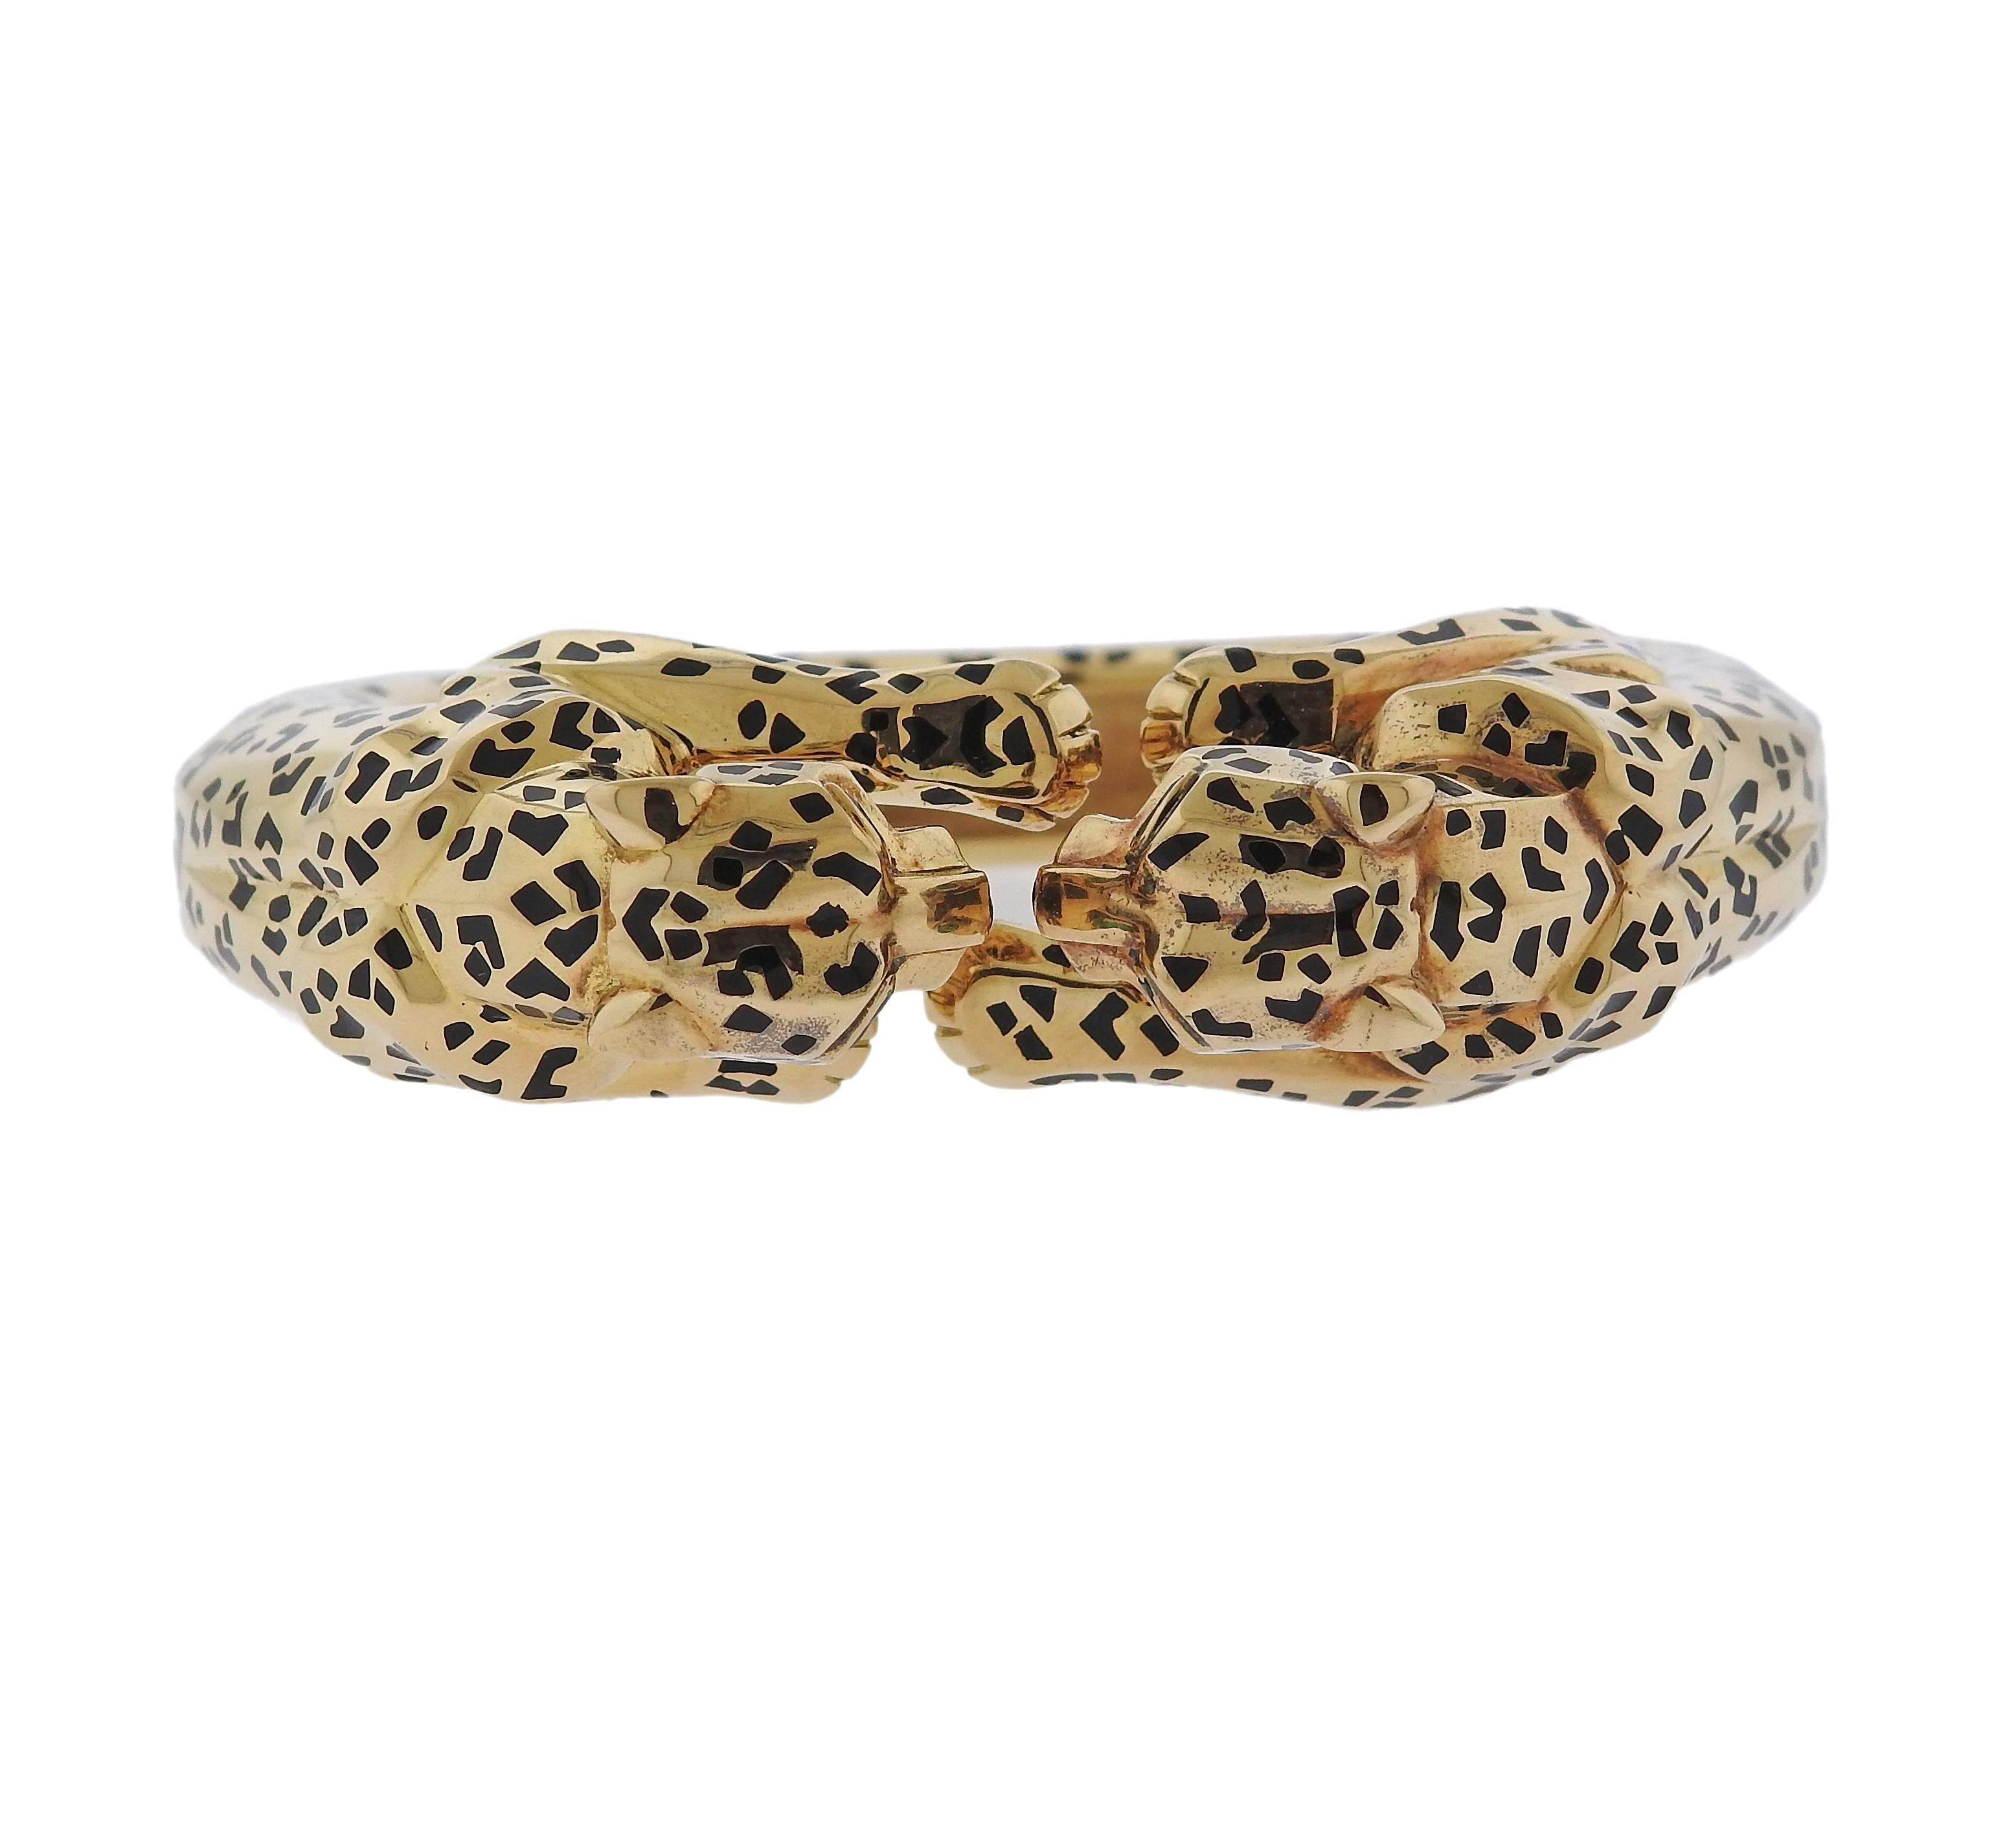 Rare iconic Panther bracelet, crafted by Cartier, set with enamel and emerald eyes. Bracelet will fit approx. 7 1/2" wrist and is 20mm wide ( leopards measure approx. 20mm x 21mm x 30mm each ). Marked: 633503, Cartier, 750, French gold